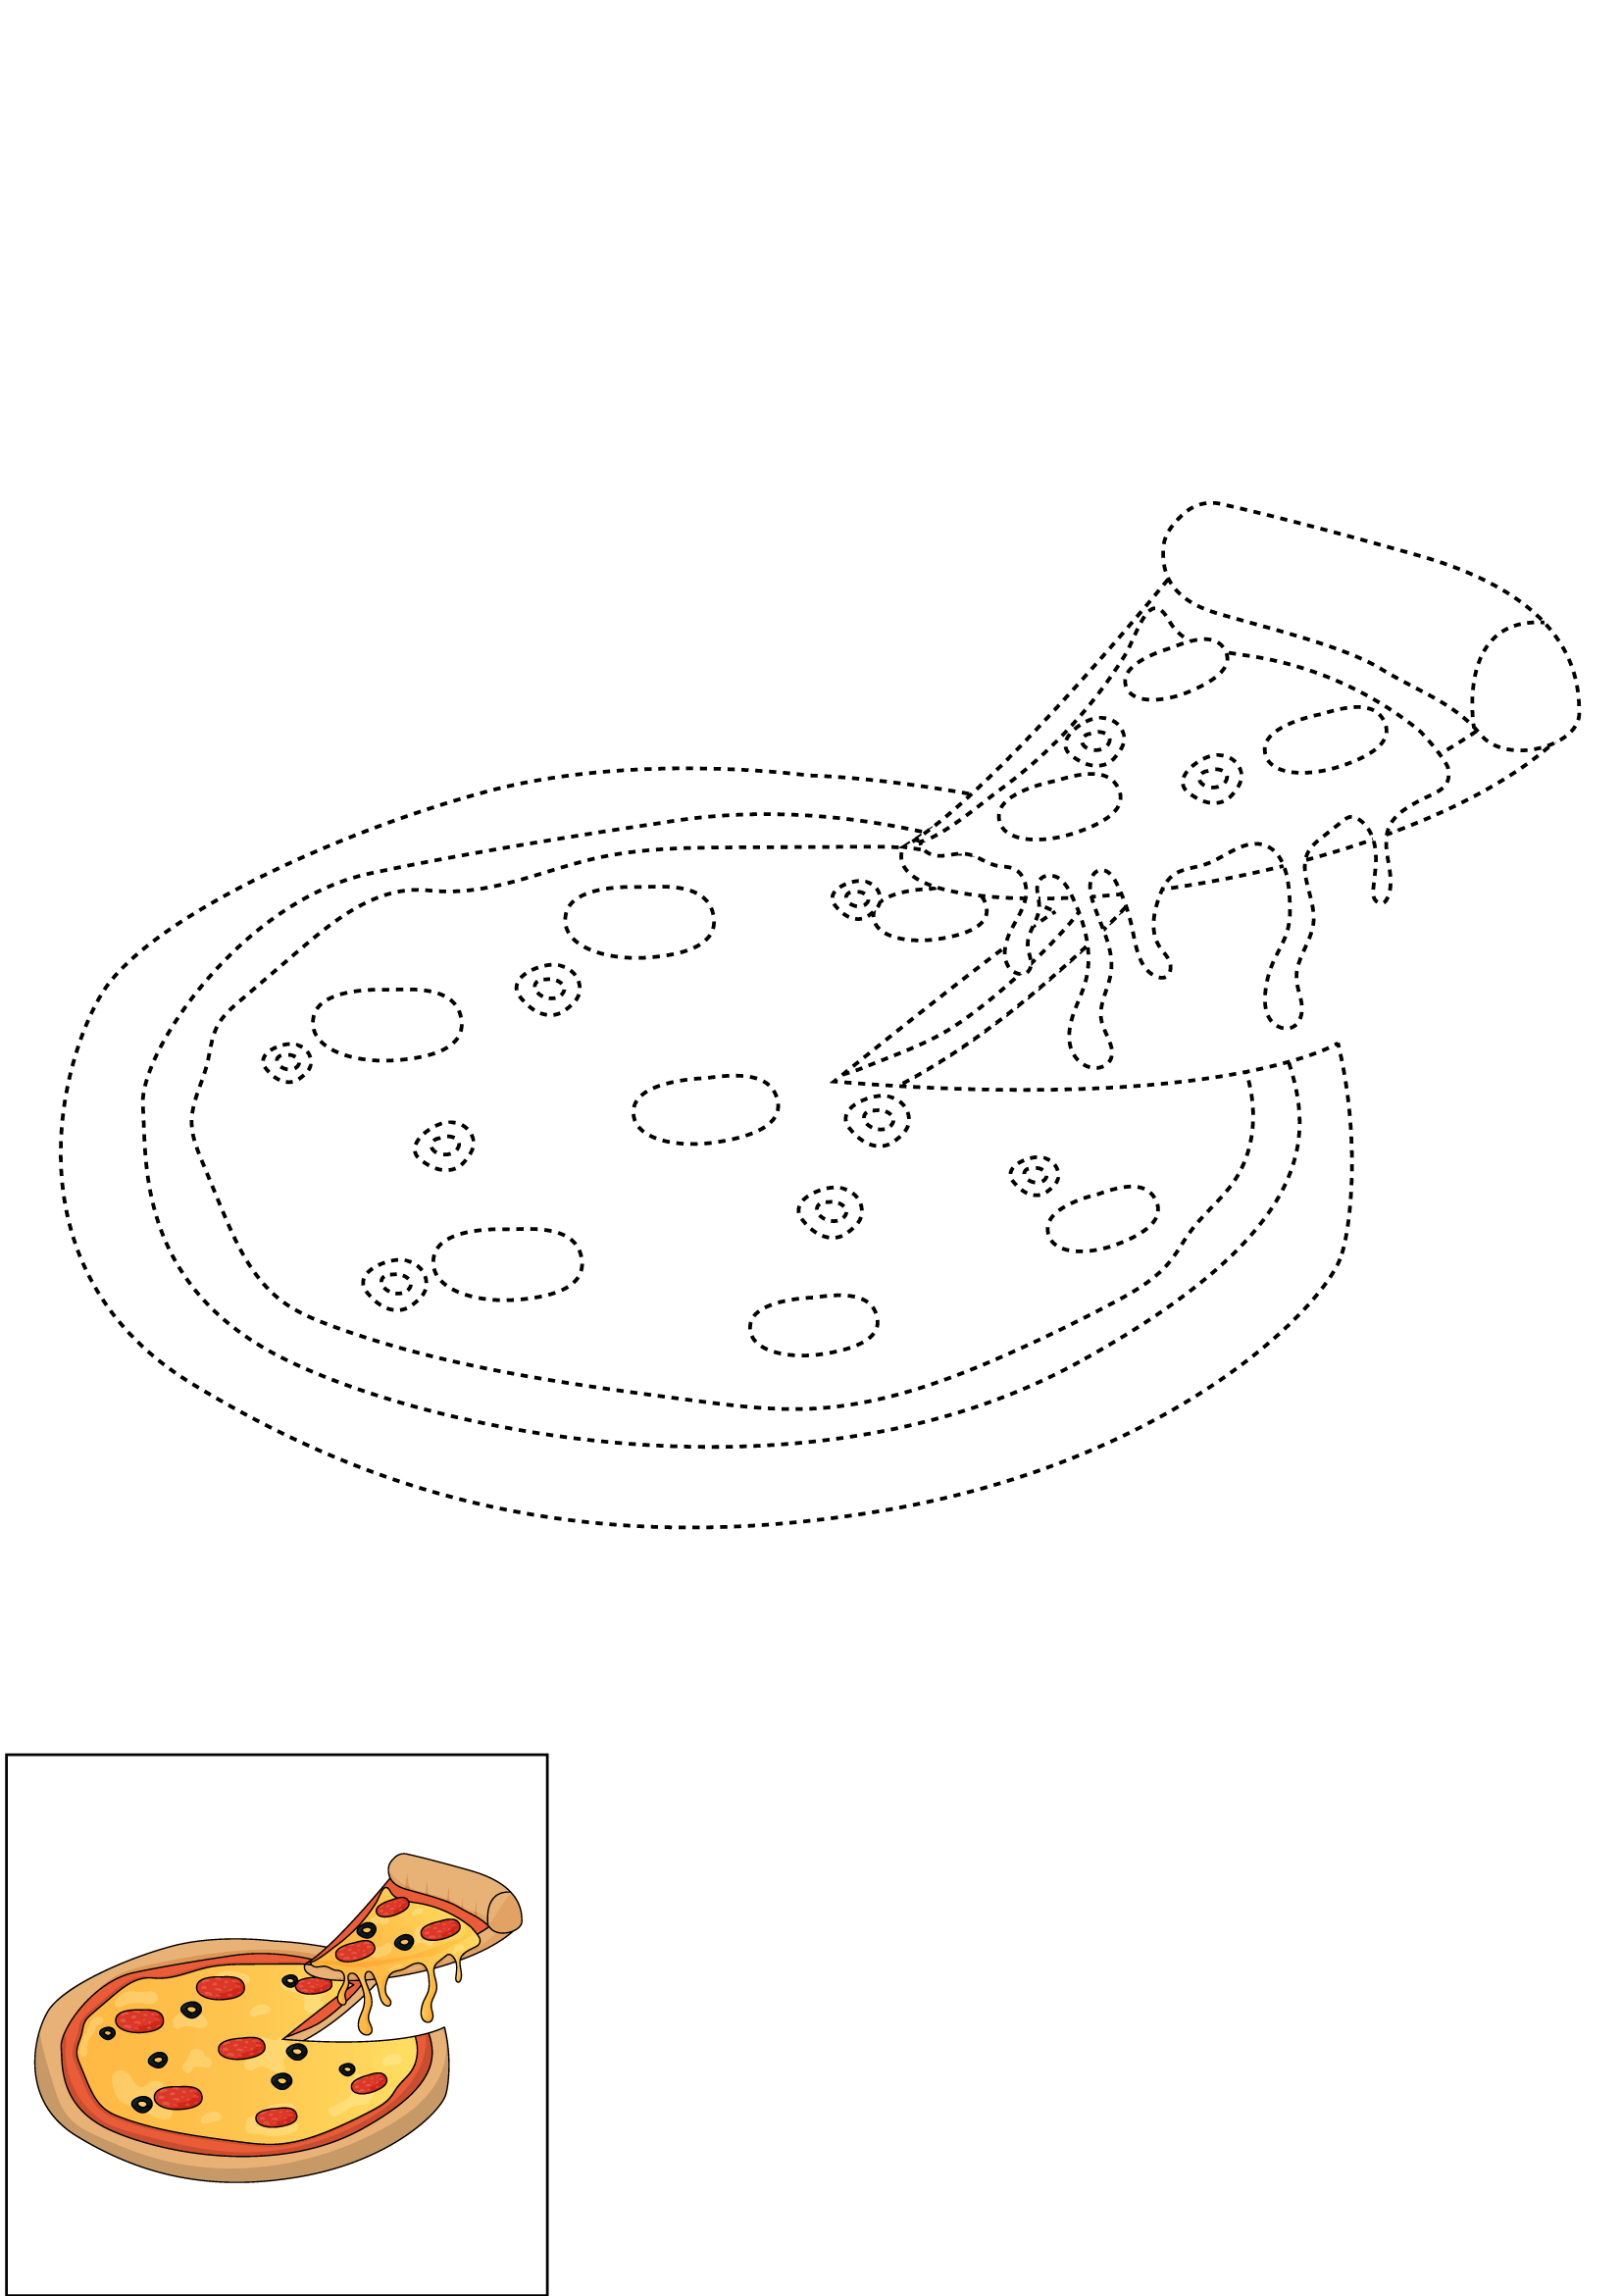 How to Draw A Pizza Step by Step Printable Dotted